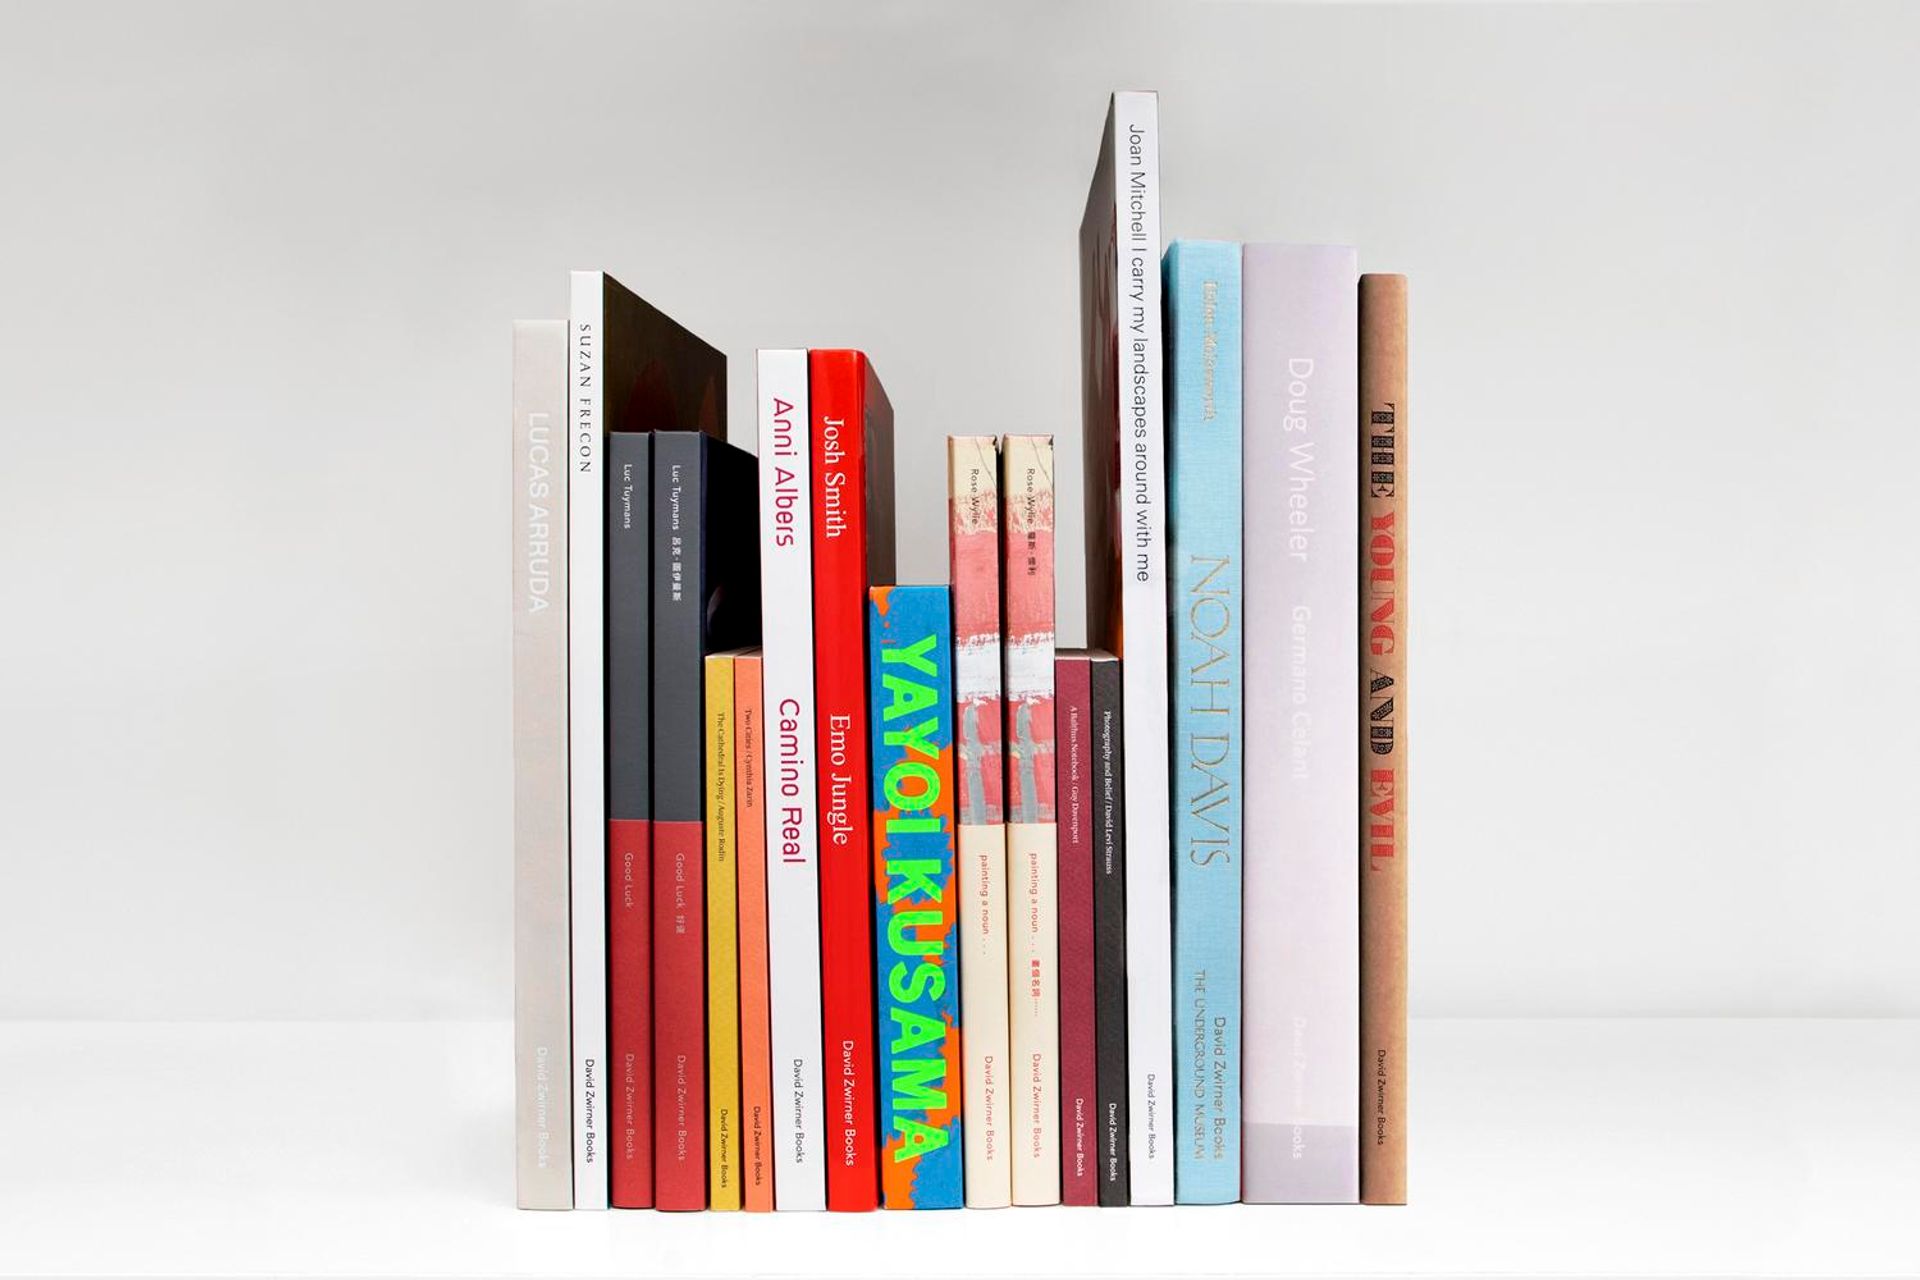 A selection of David Zwirner Books publications available to buy at the fair Courtesy of PMVABF